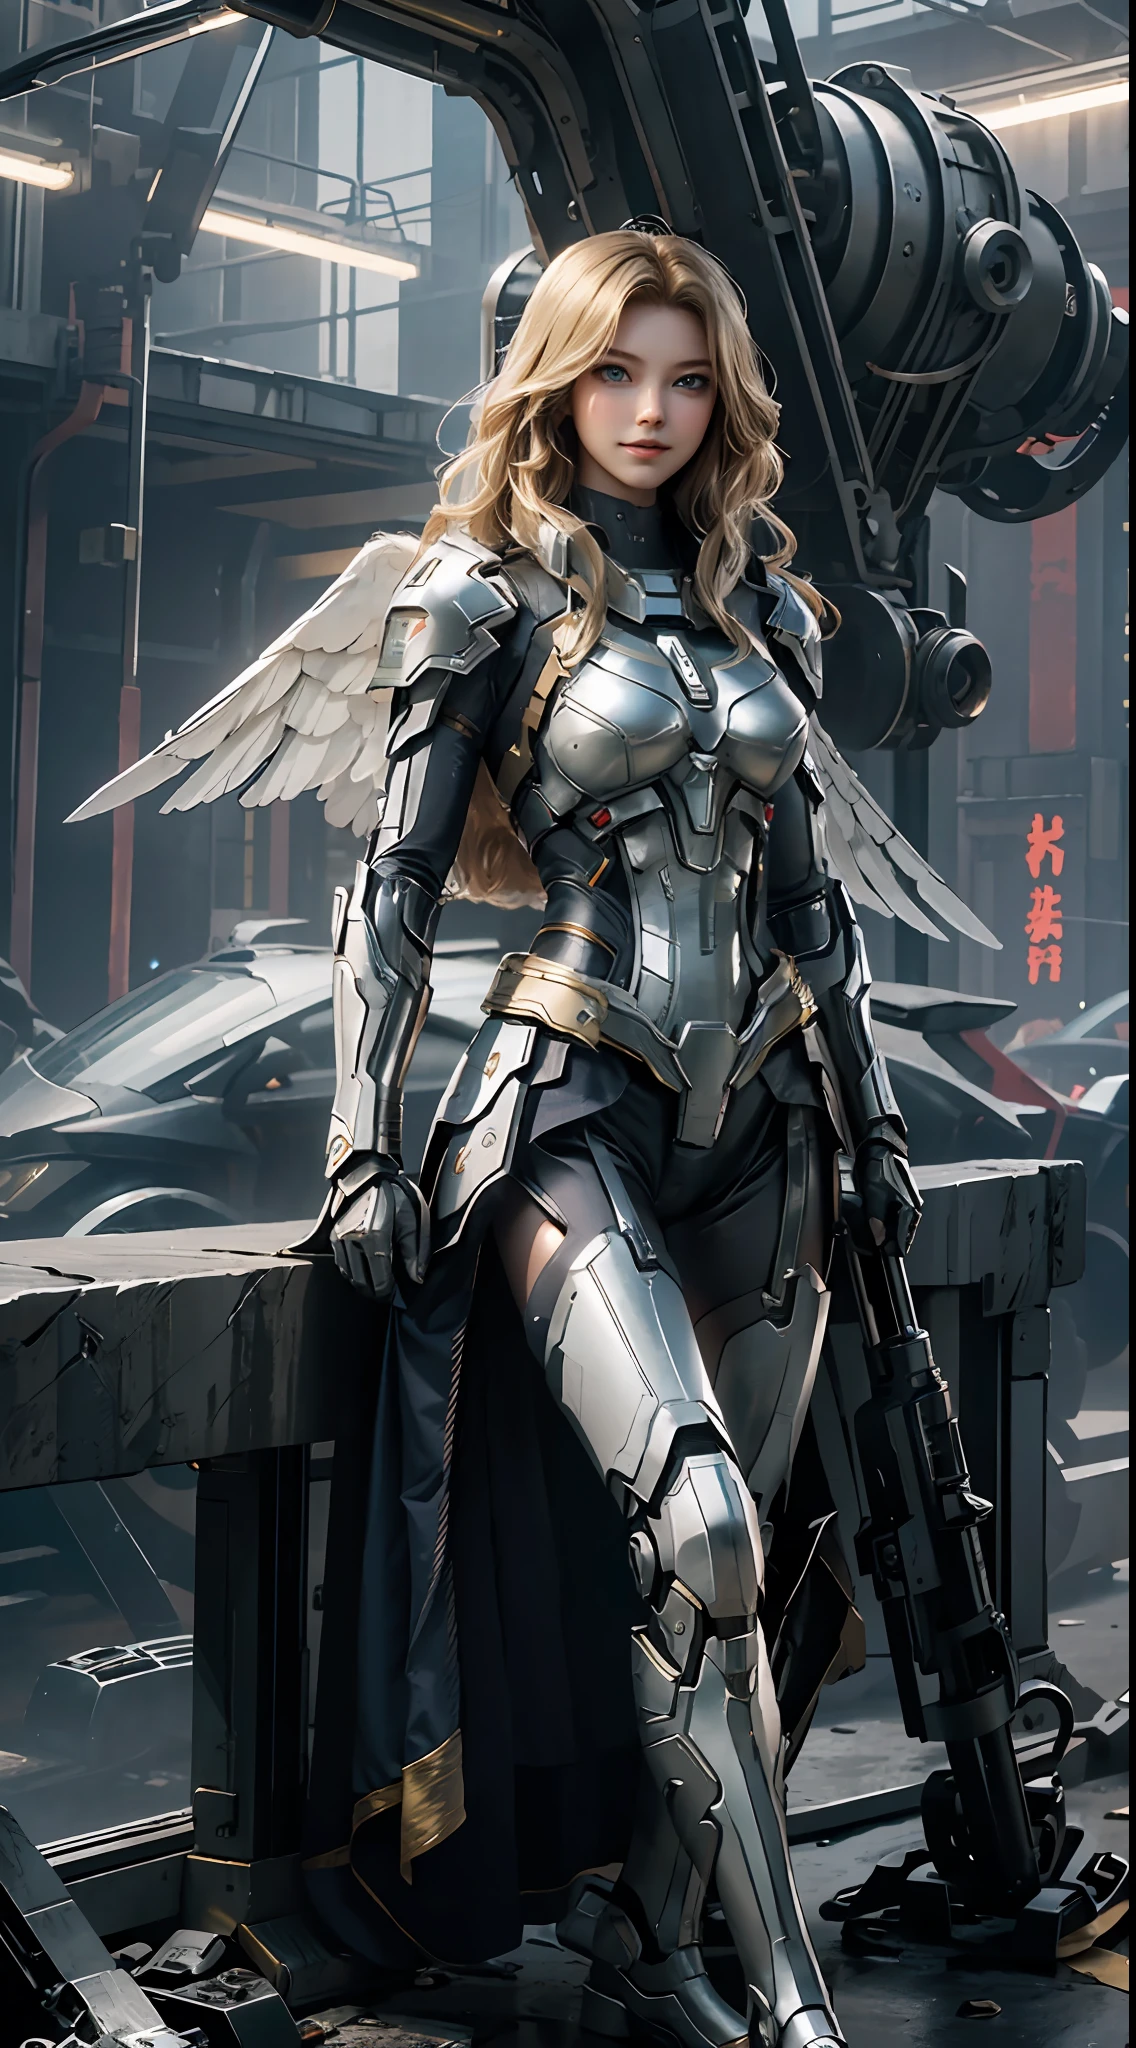 Supergirl masterpiece, (best quality), highly detailed, ultra-detailed, 1Supergirl, (mechanicalwings: golden, glowingeyes: blue, silverarmor: 1.2, elongated ears: 0.8), (cyberpunkcity: 1.5, weapon: energyblade), (fantasylandscape: 1.2, natural lighting: 1.5, confidentexpression), (panorama: 1.2), mecha, blonde, smile, blue eyes, angle, angels, wings, with Superman's S on his chest.